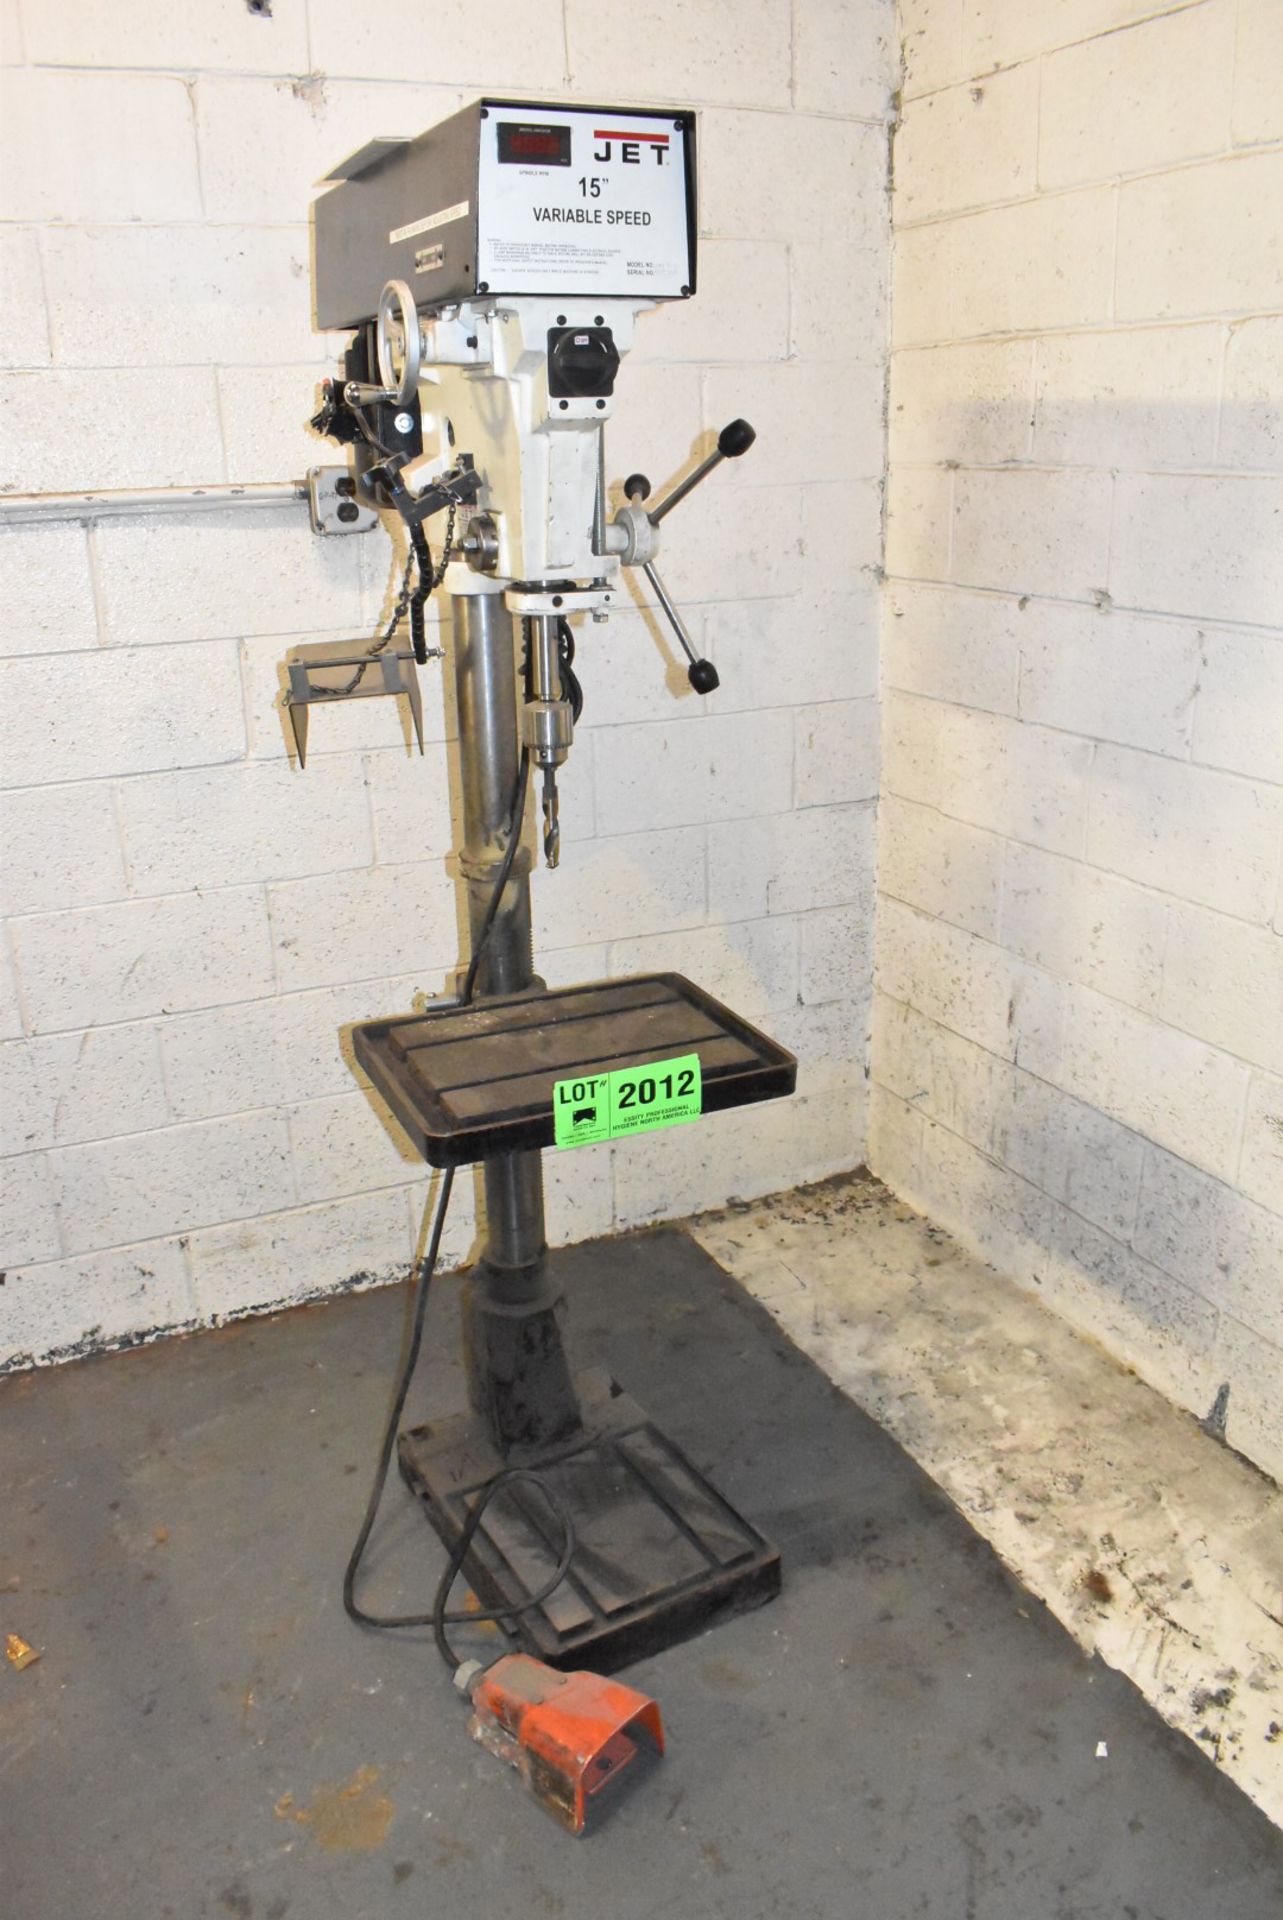 JET J-A5816 15" VARIABLE SPEED FLOOR TYPE DRILL PRESS S/N 10100341 (CI) [RIGGING FEES FOR LOT #